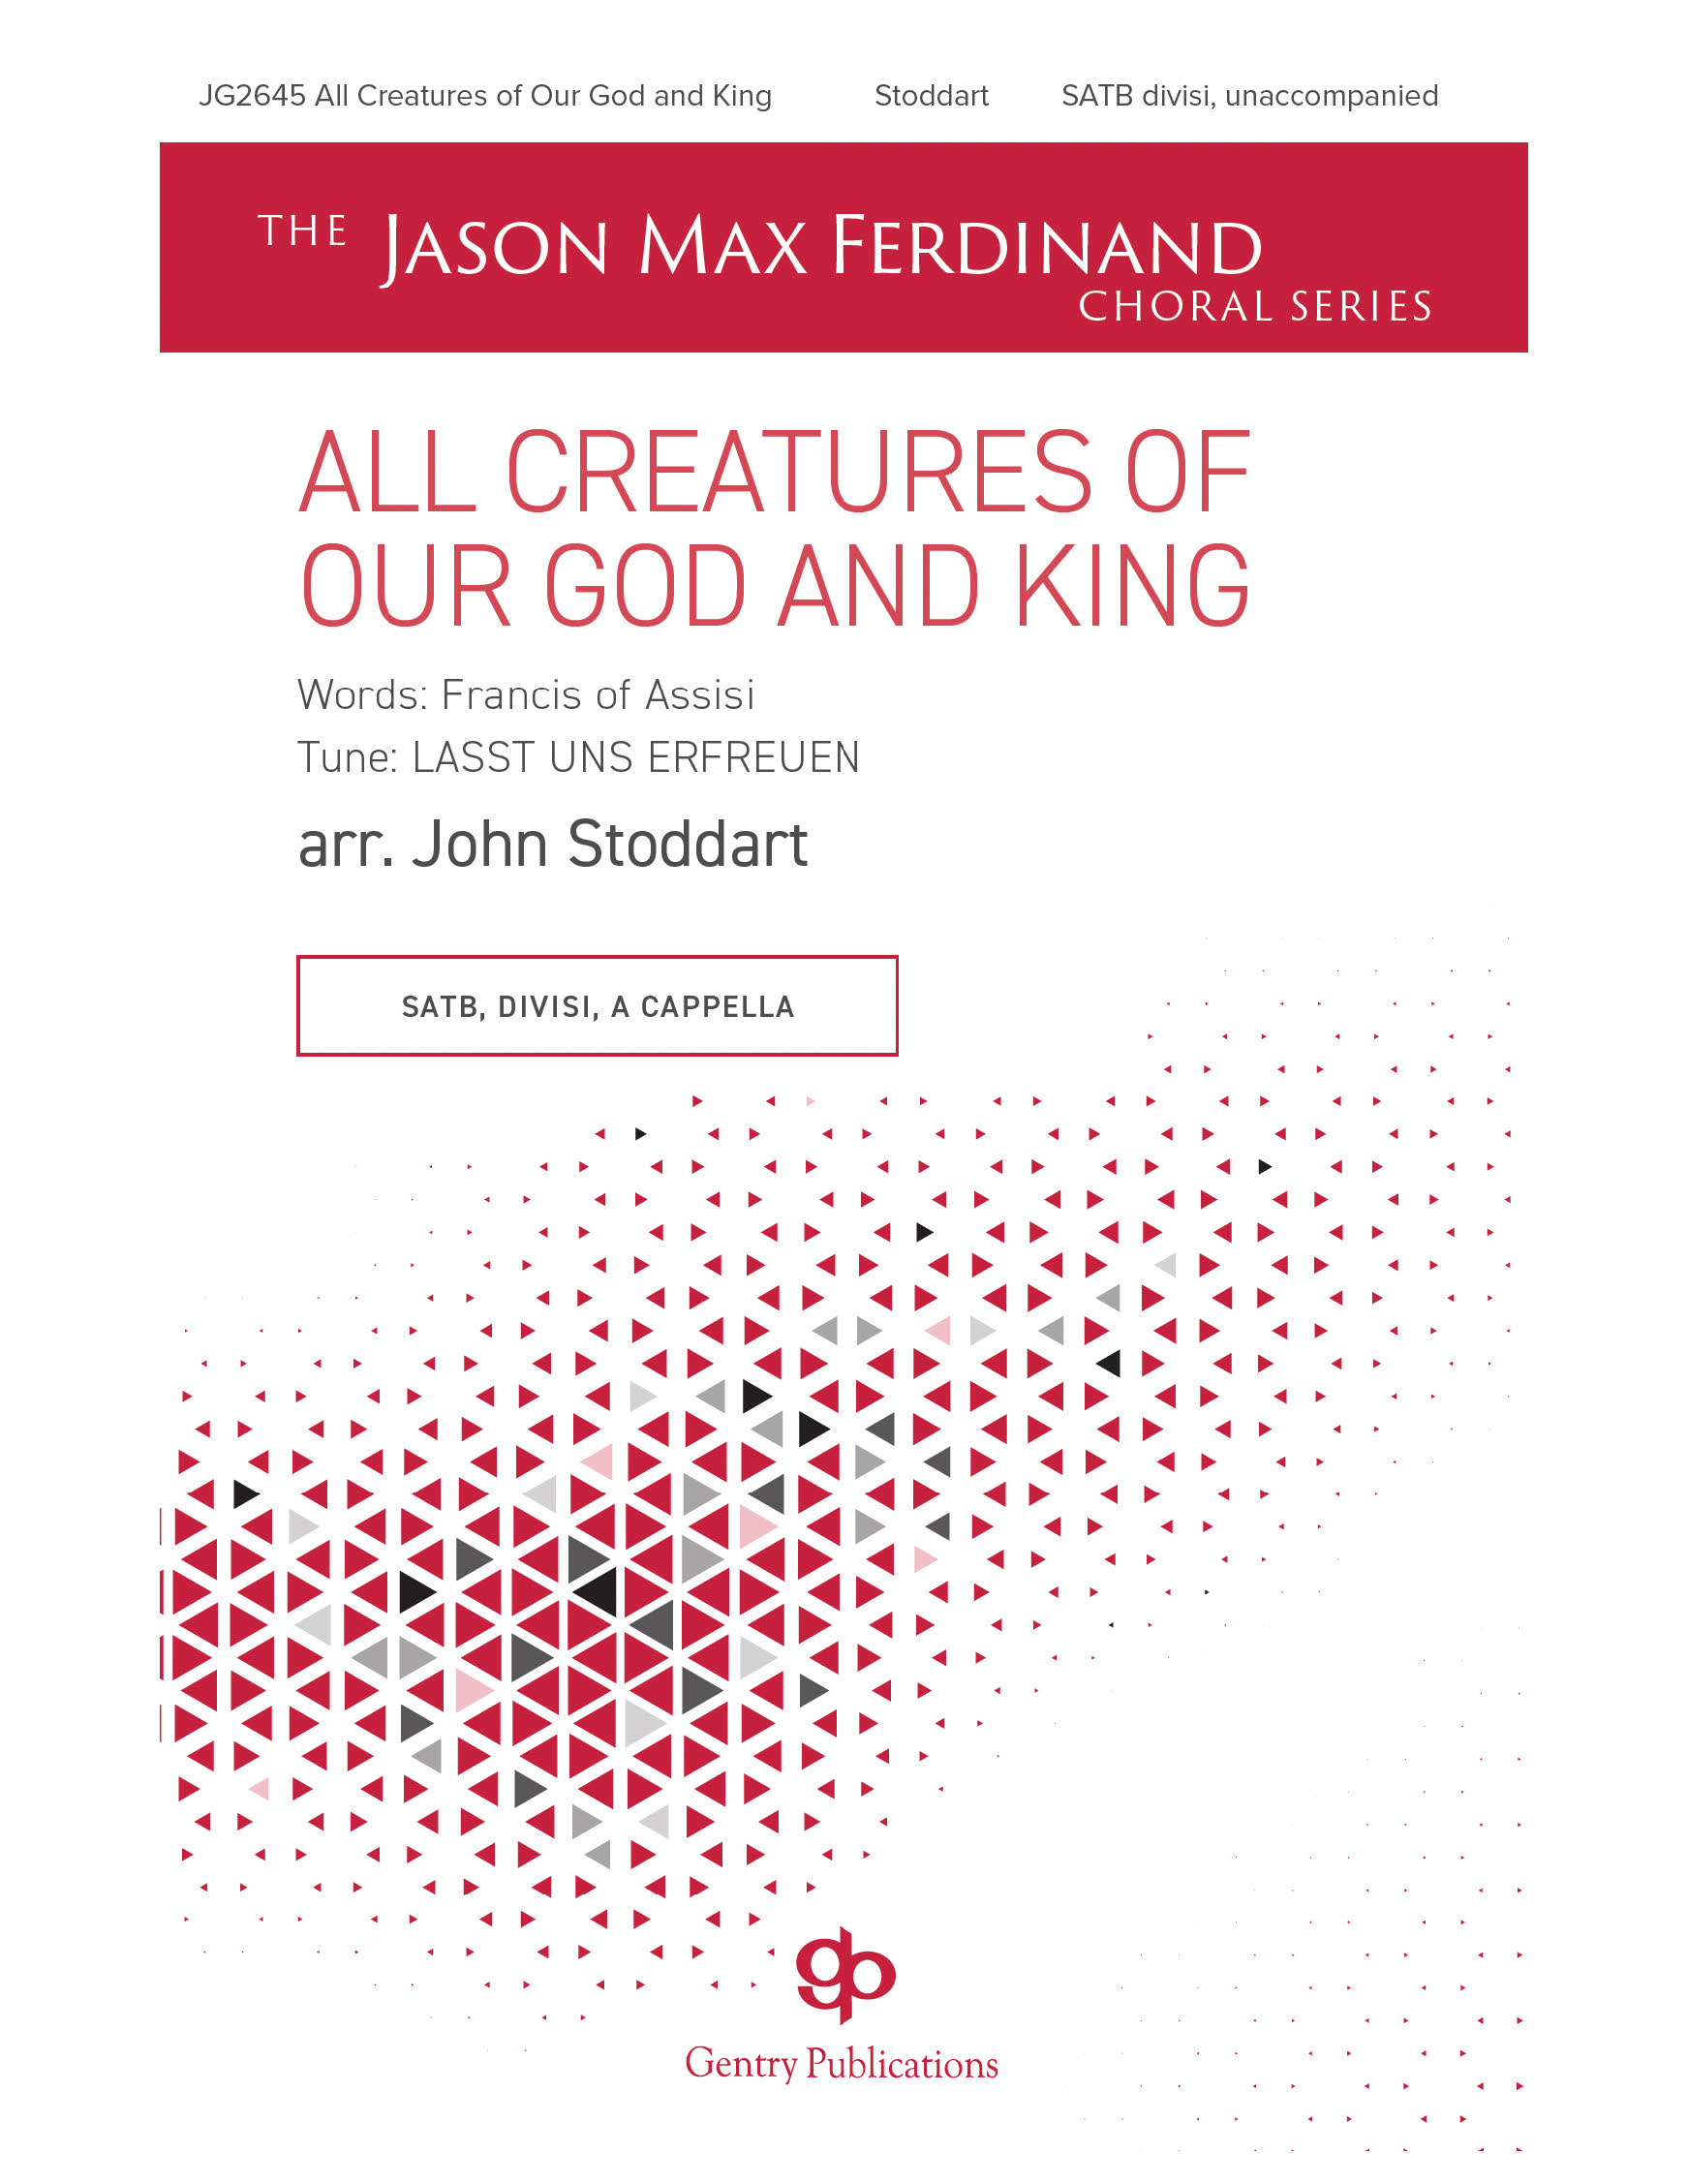 All Creatures of My God and King